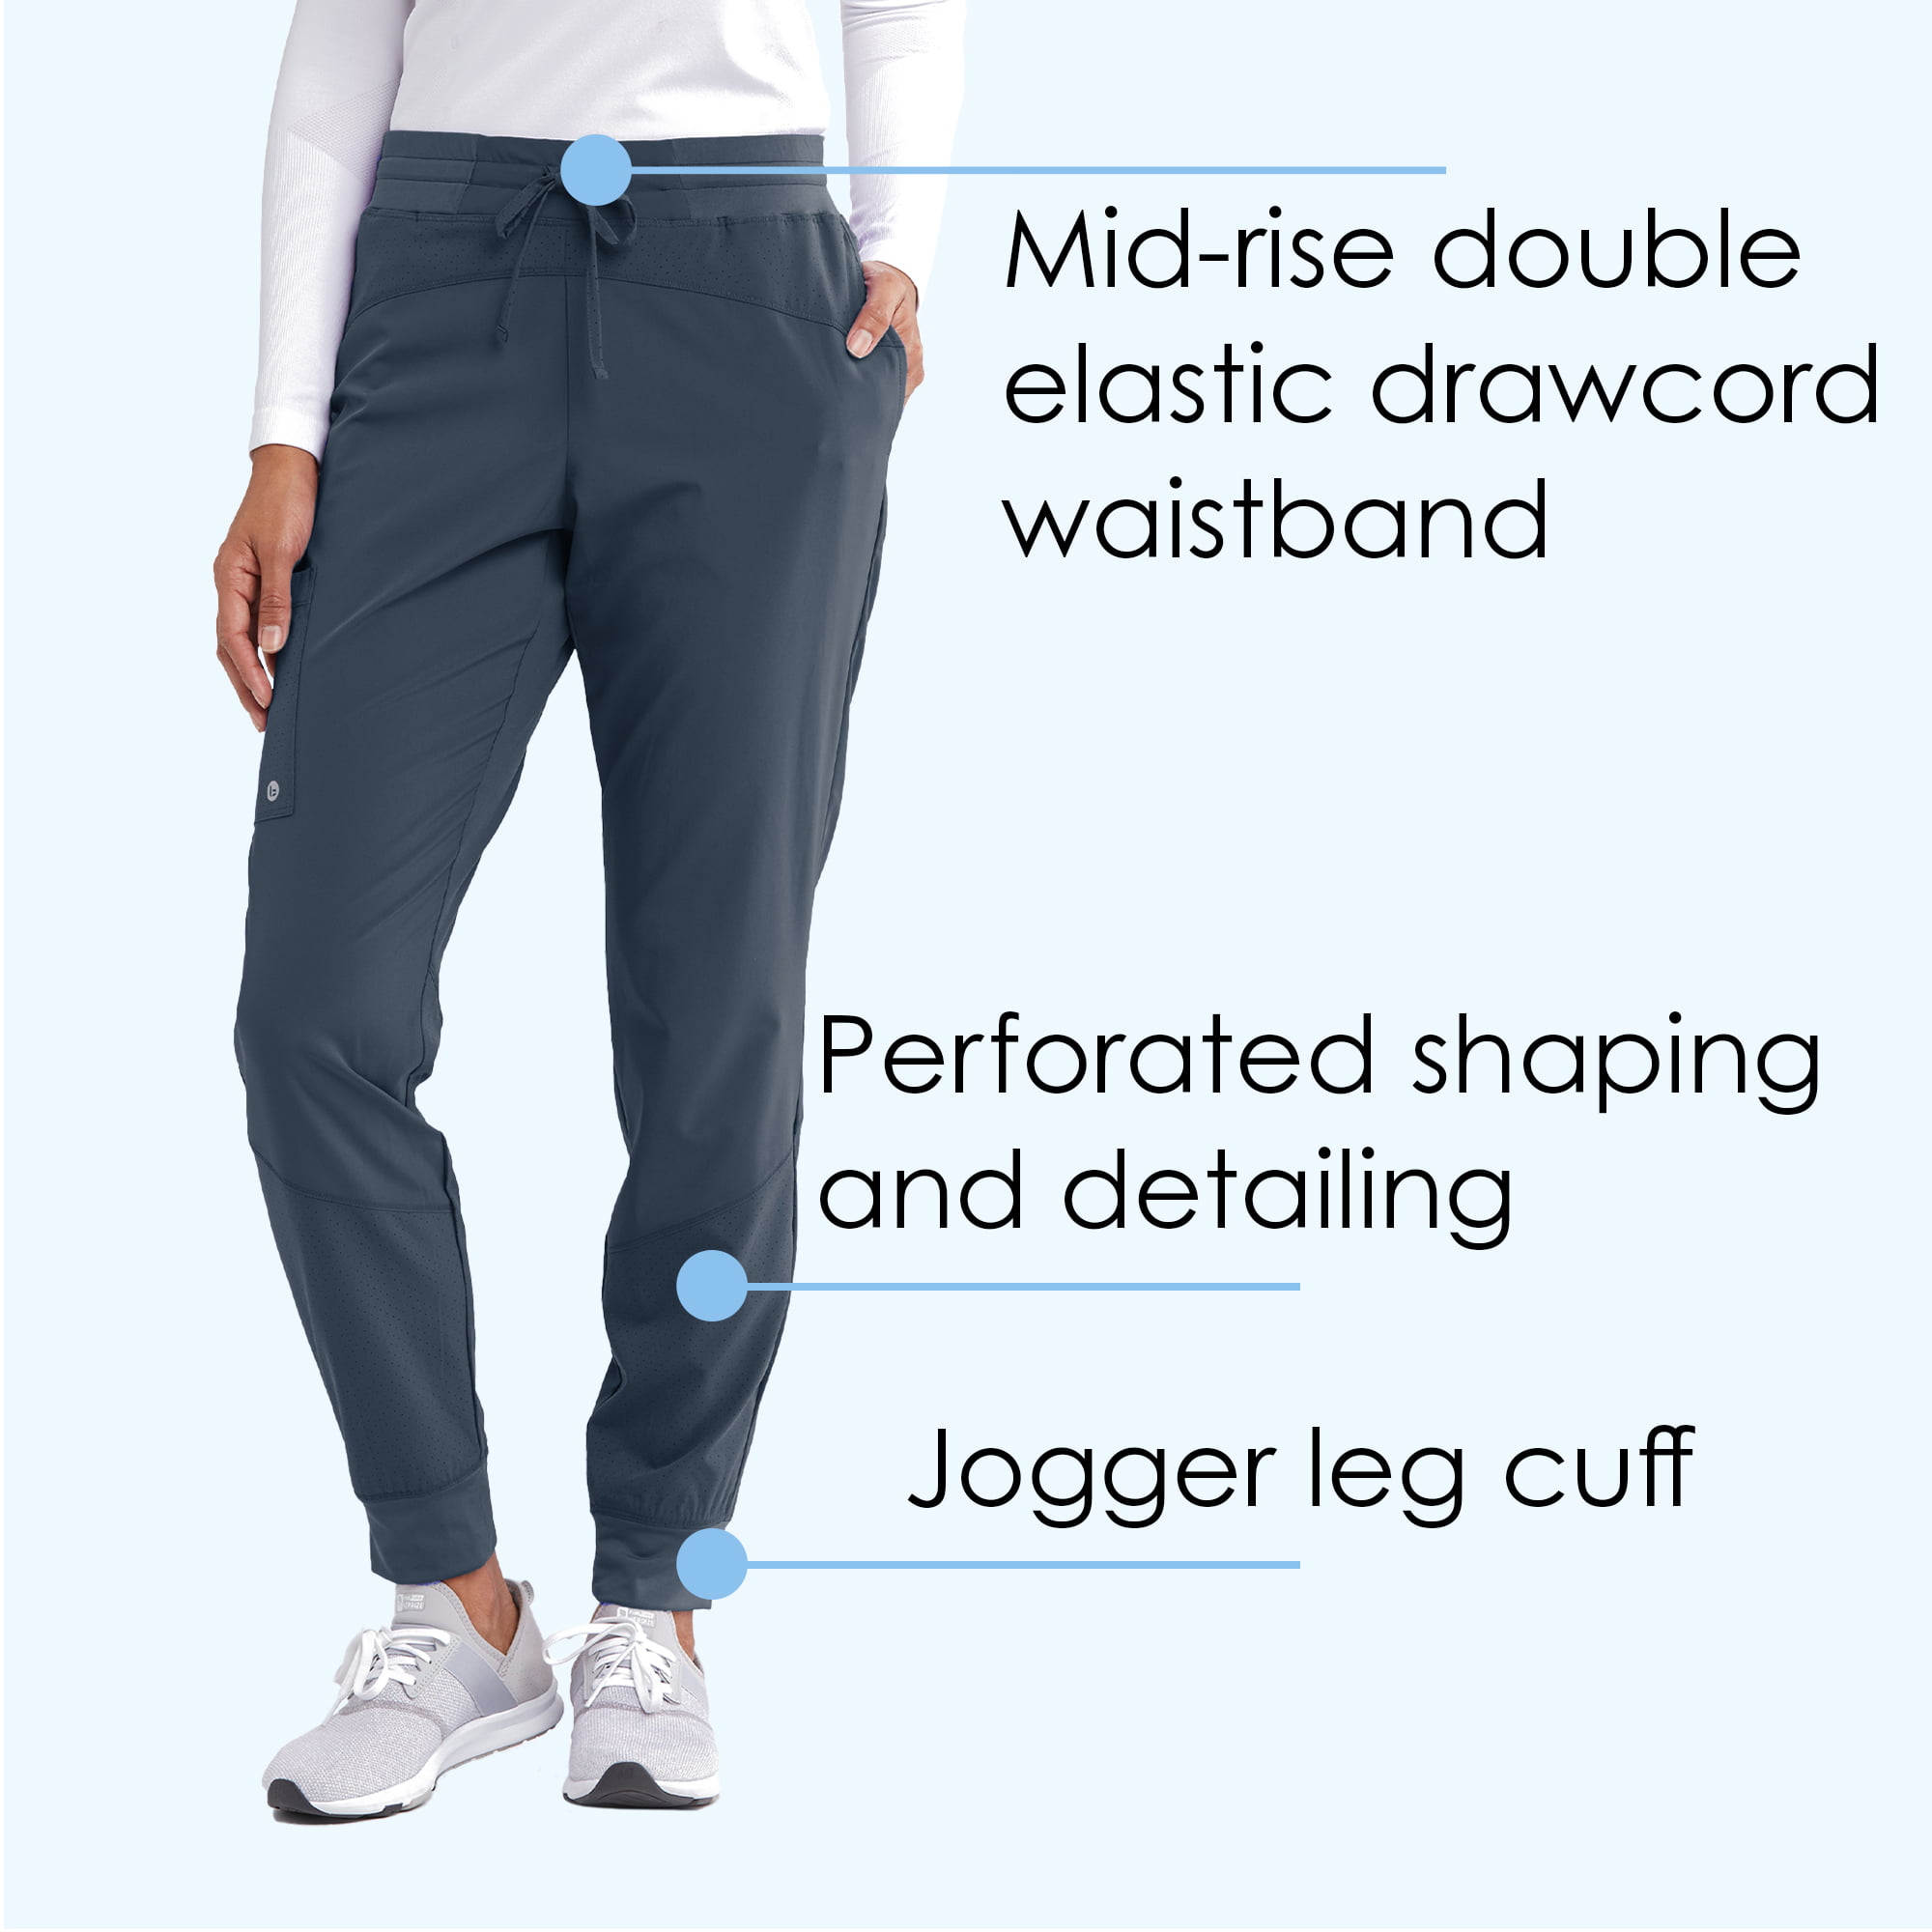 Women's Stride Pant Yoga Style Medical Scrub Pant w/ 5 Pockets and 4-Way Stretch Fabric BARCO ONE 